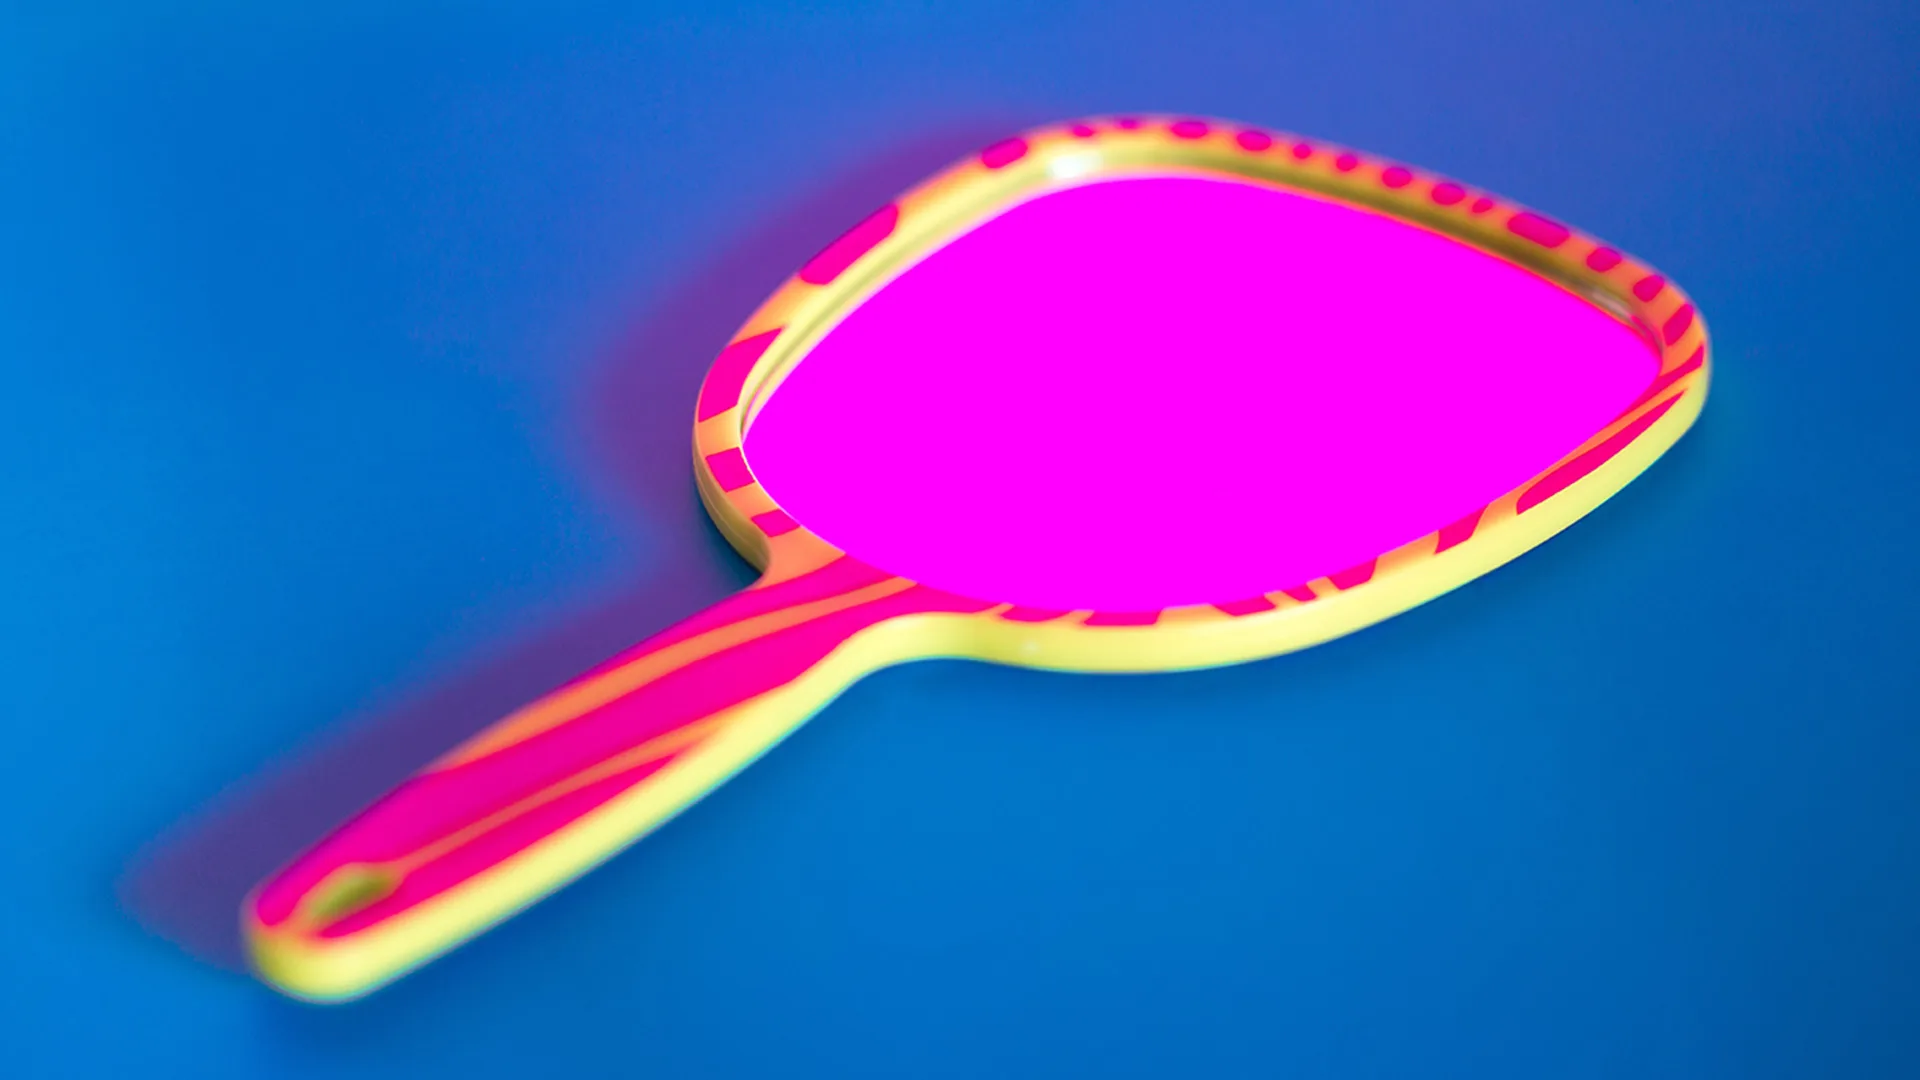 A pink mirror on a blue background